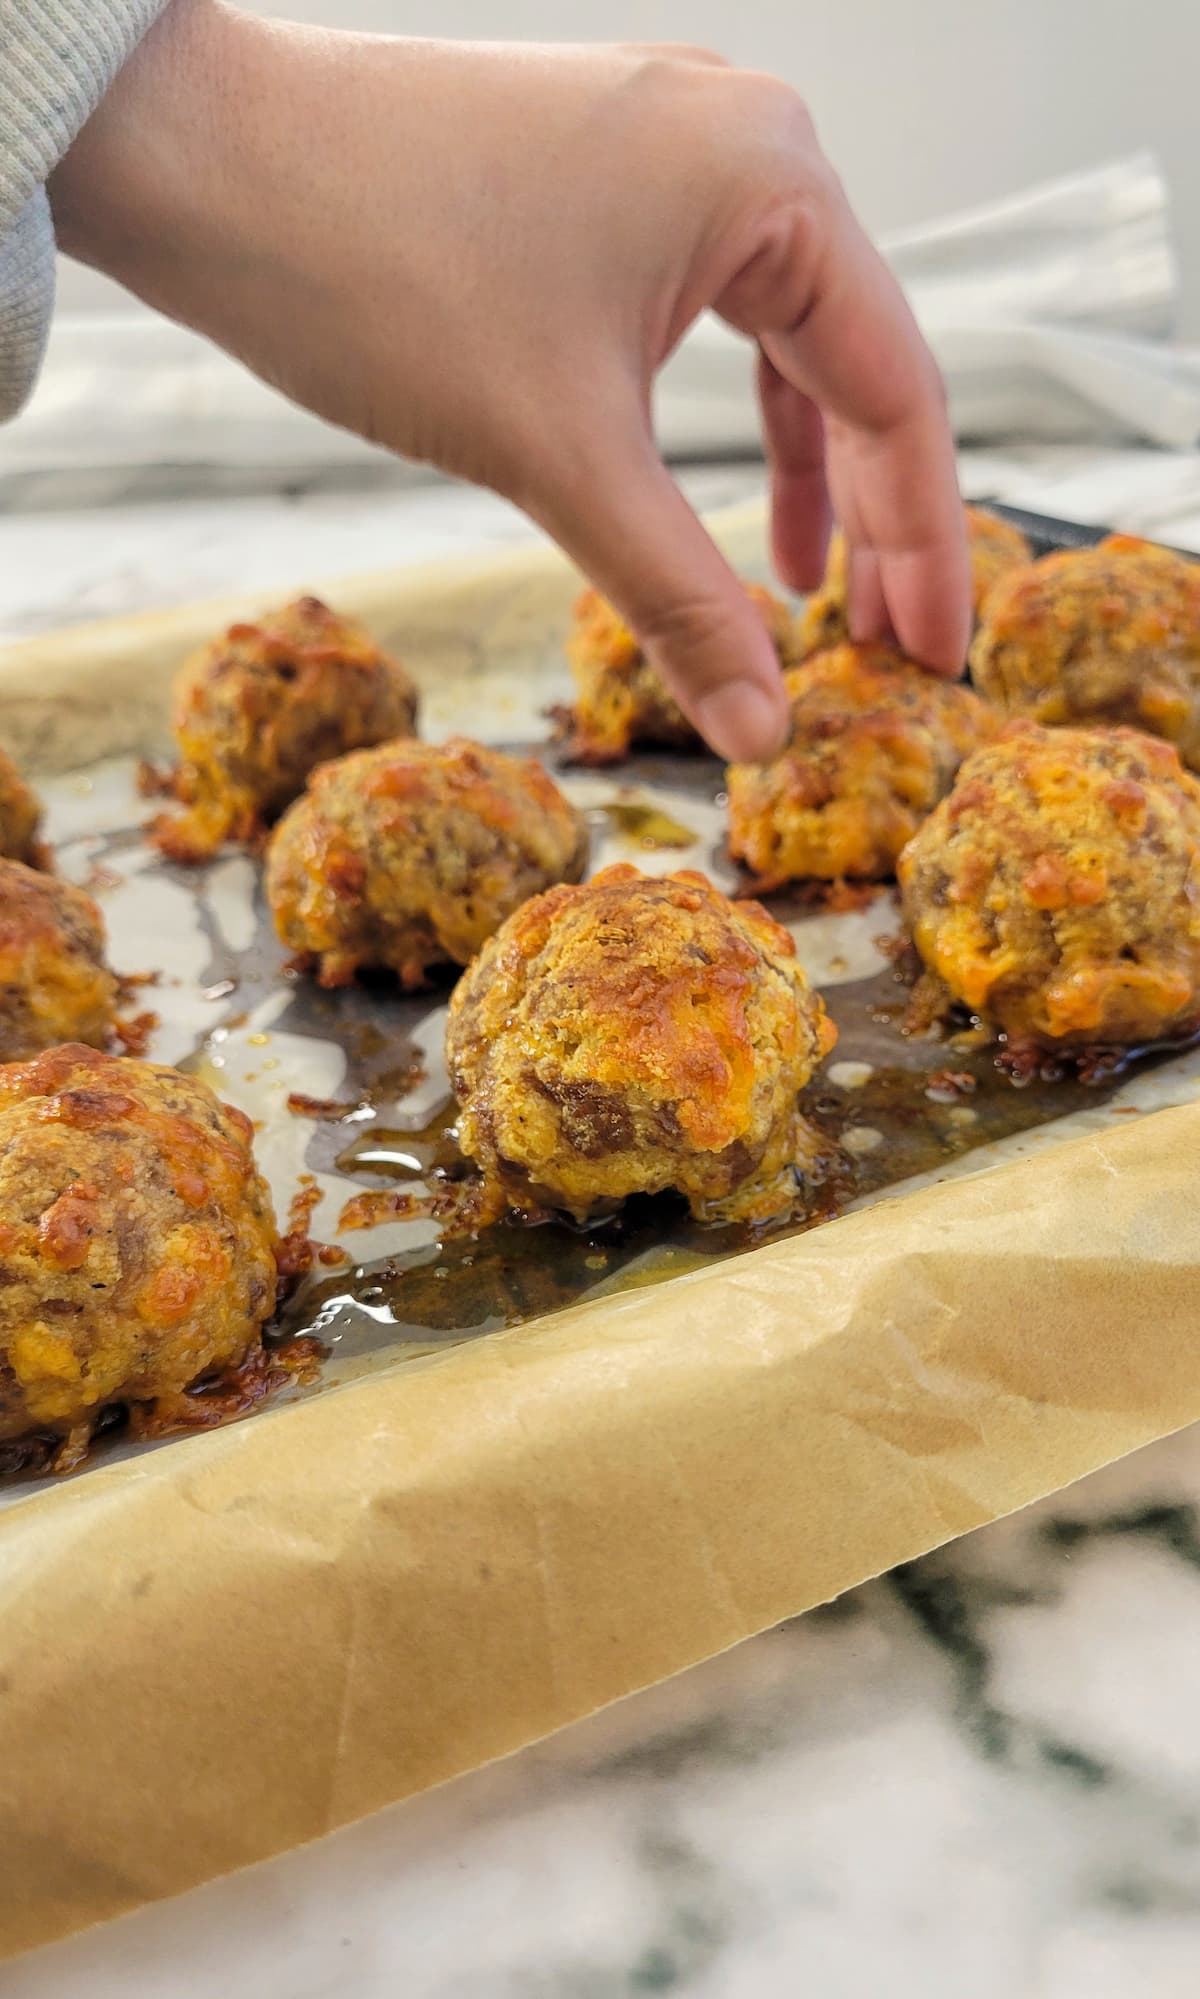 hand picking up a cooked sausage ball off a parchment lined baking sheet with more